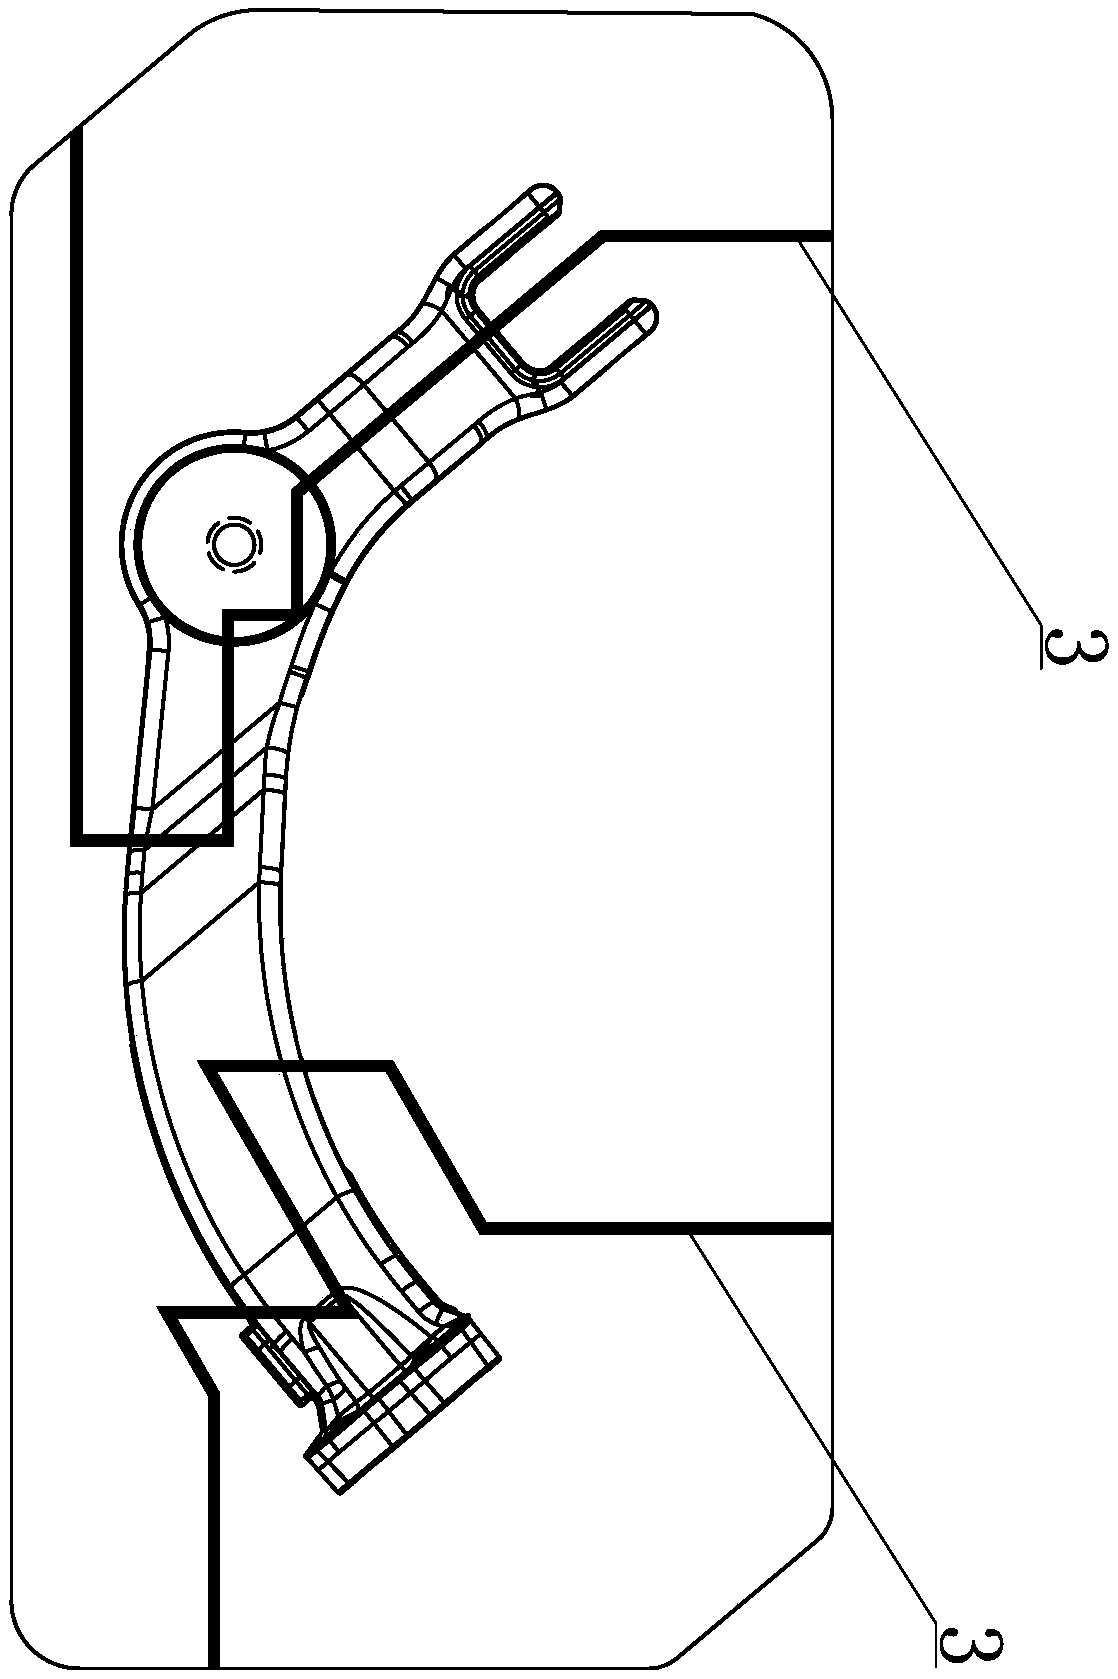 A method for producing aluminum alloy airbag support arm with horizontal squeeze casting machine